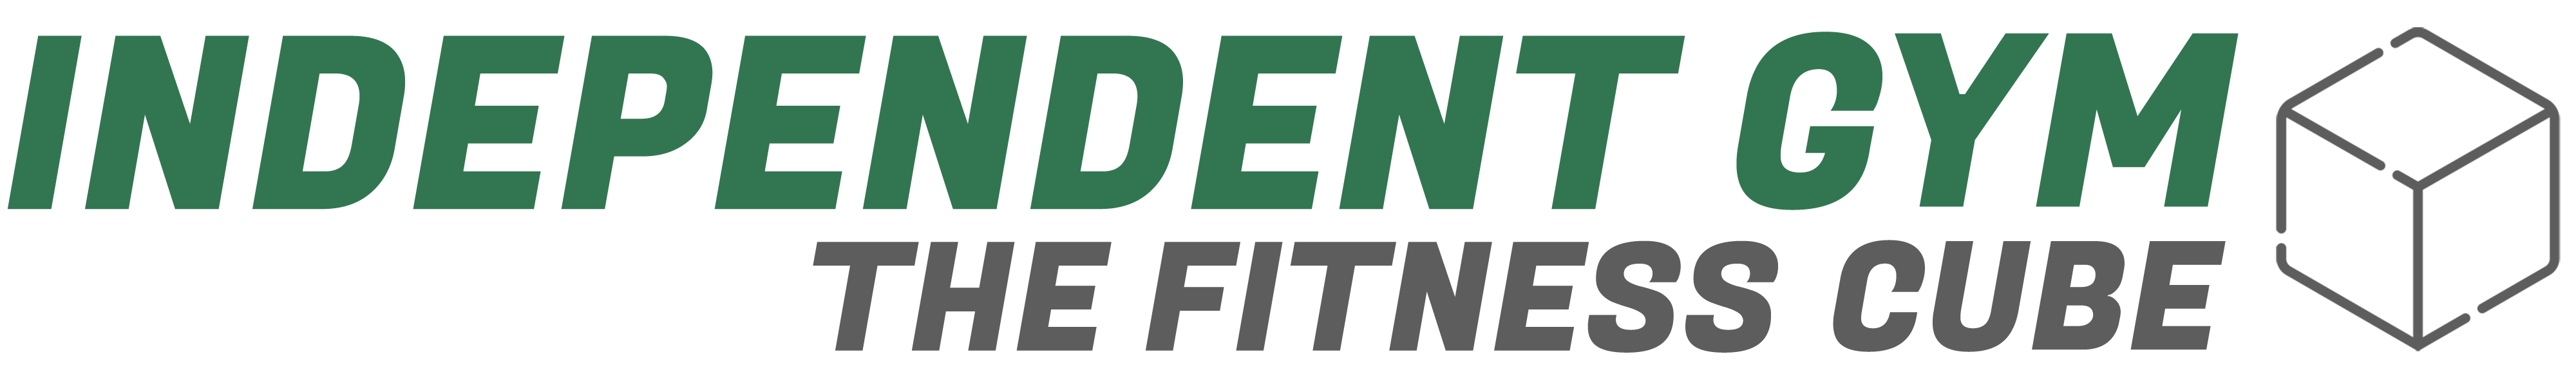 Independent Gym